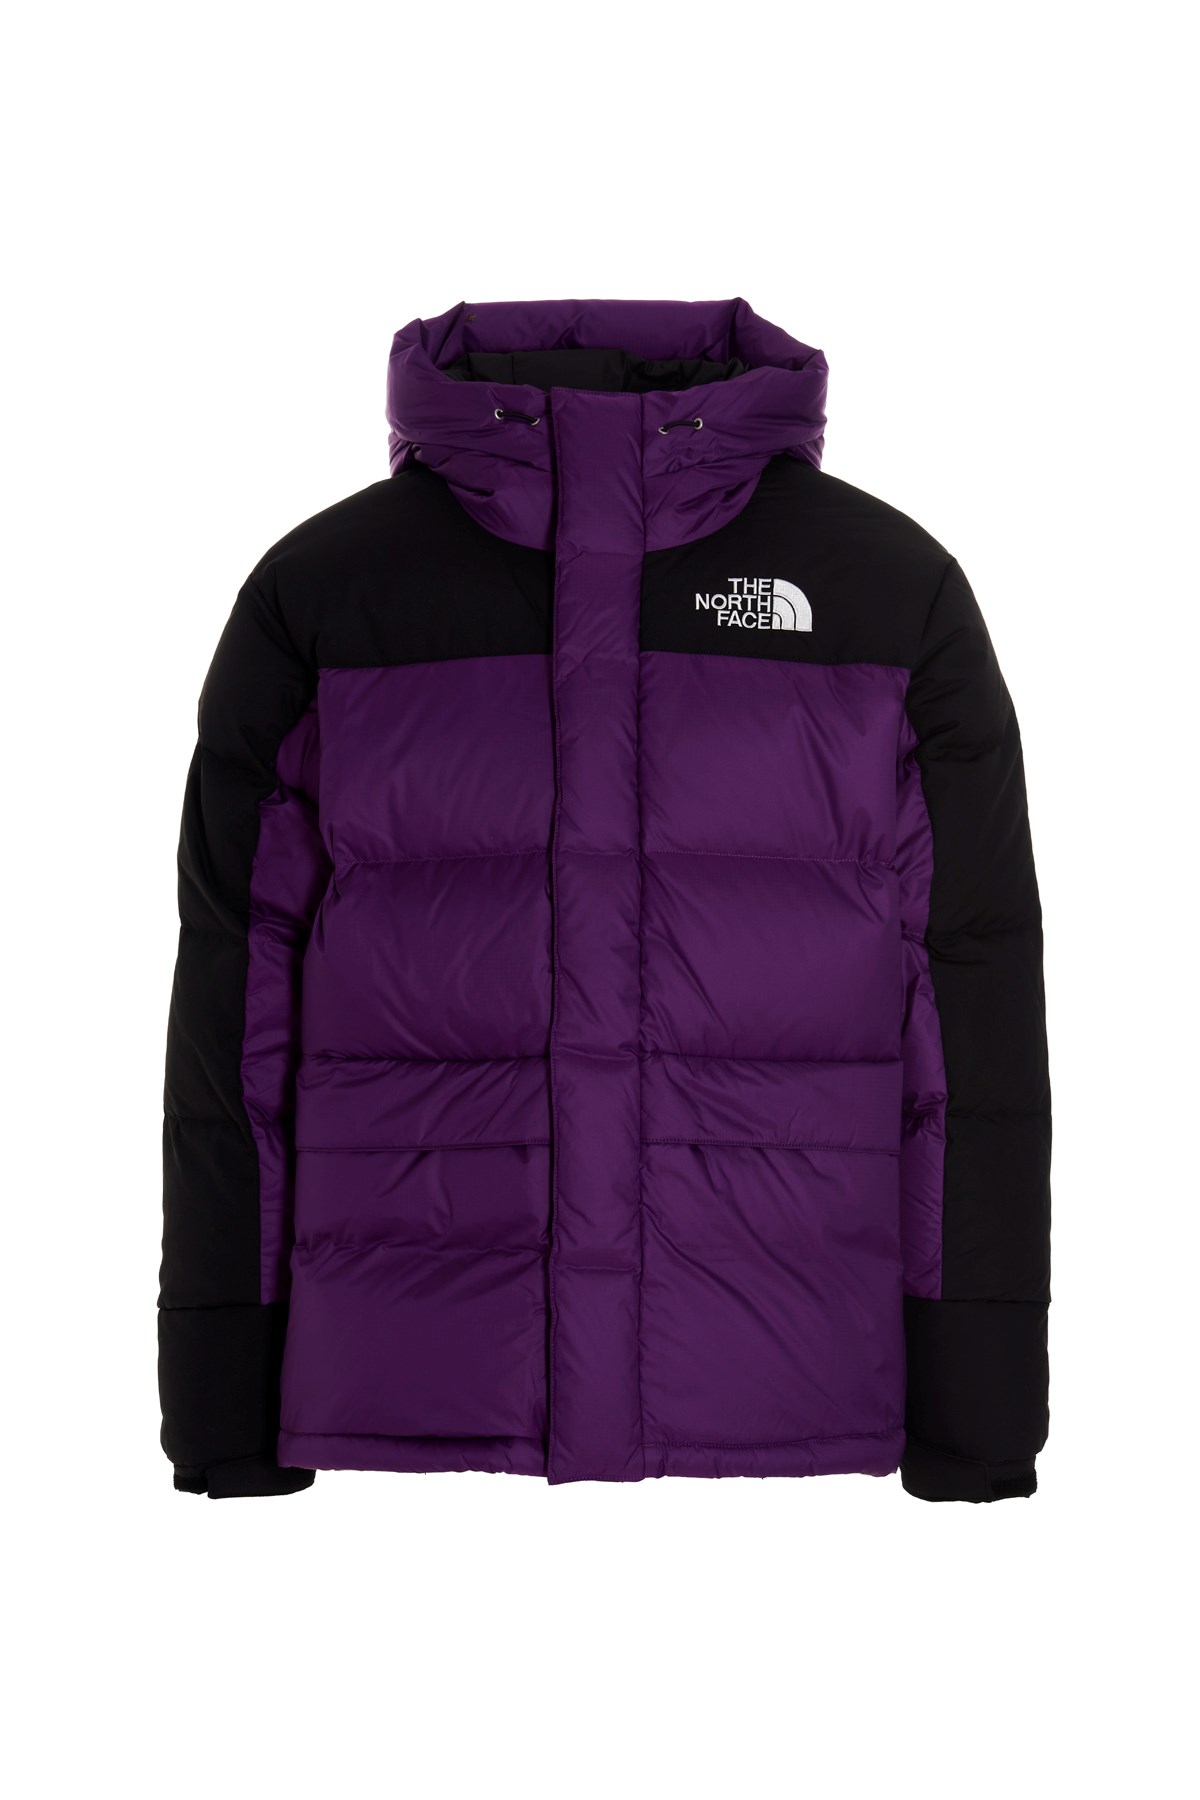 THE NORTH FACE 'Hymalyan’ Down Jacket